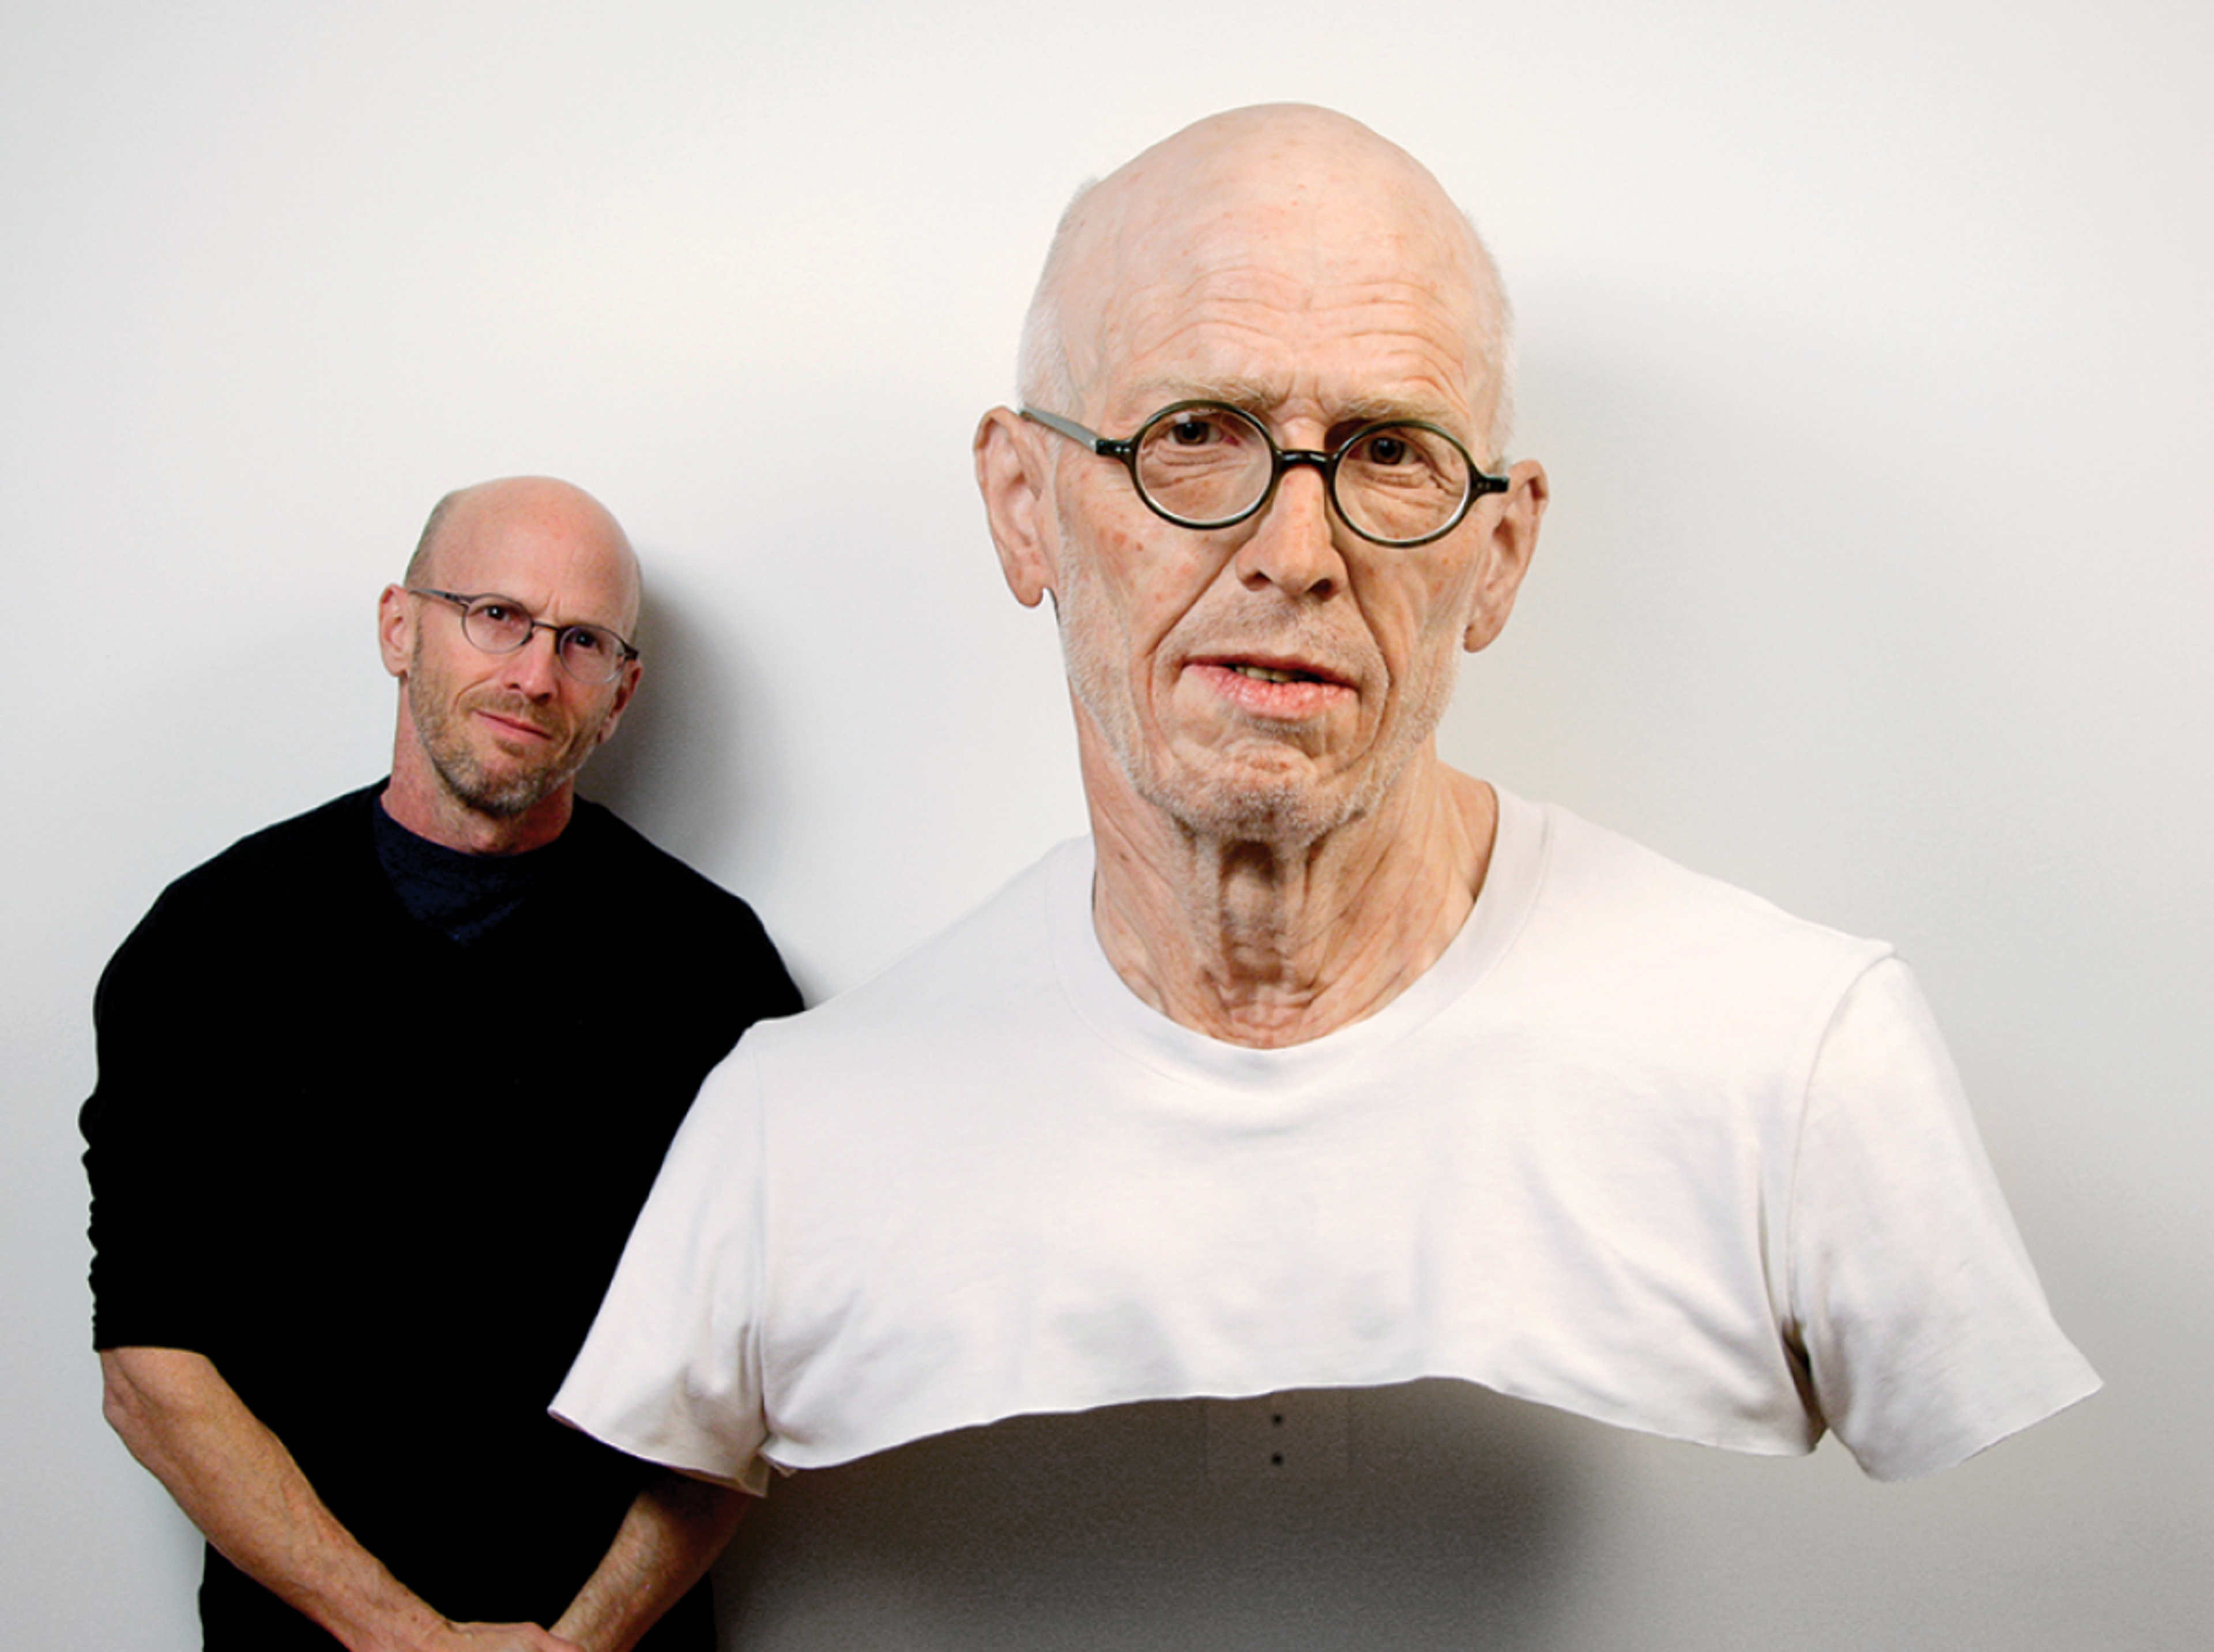 Photo of the artist standing behind a realistic sculpture of himself as an old man